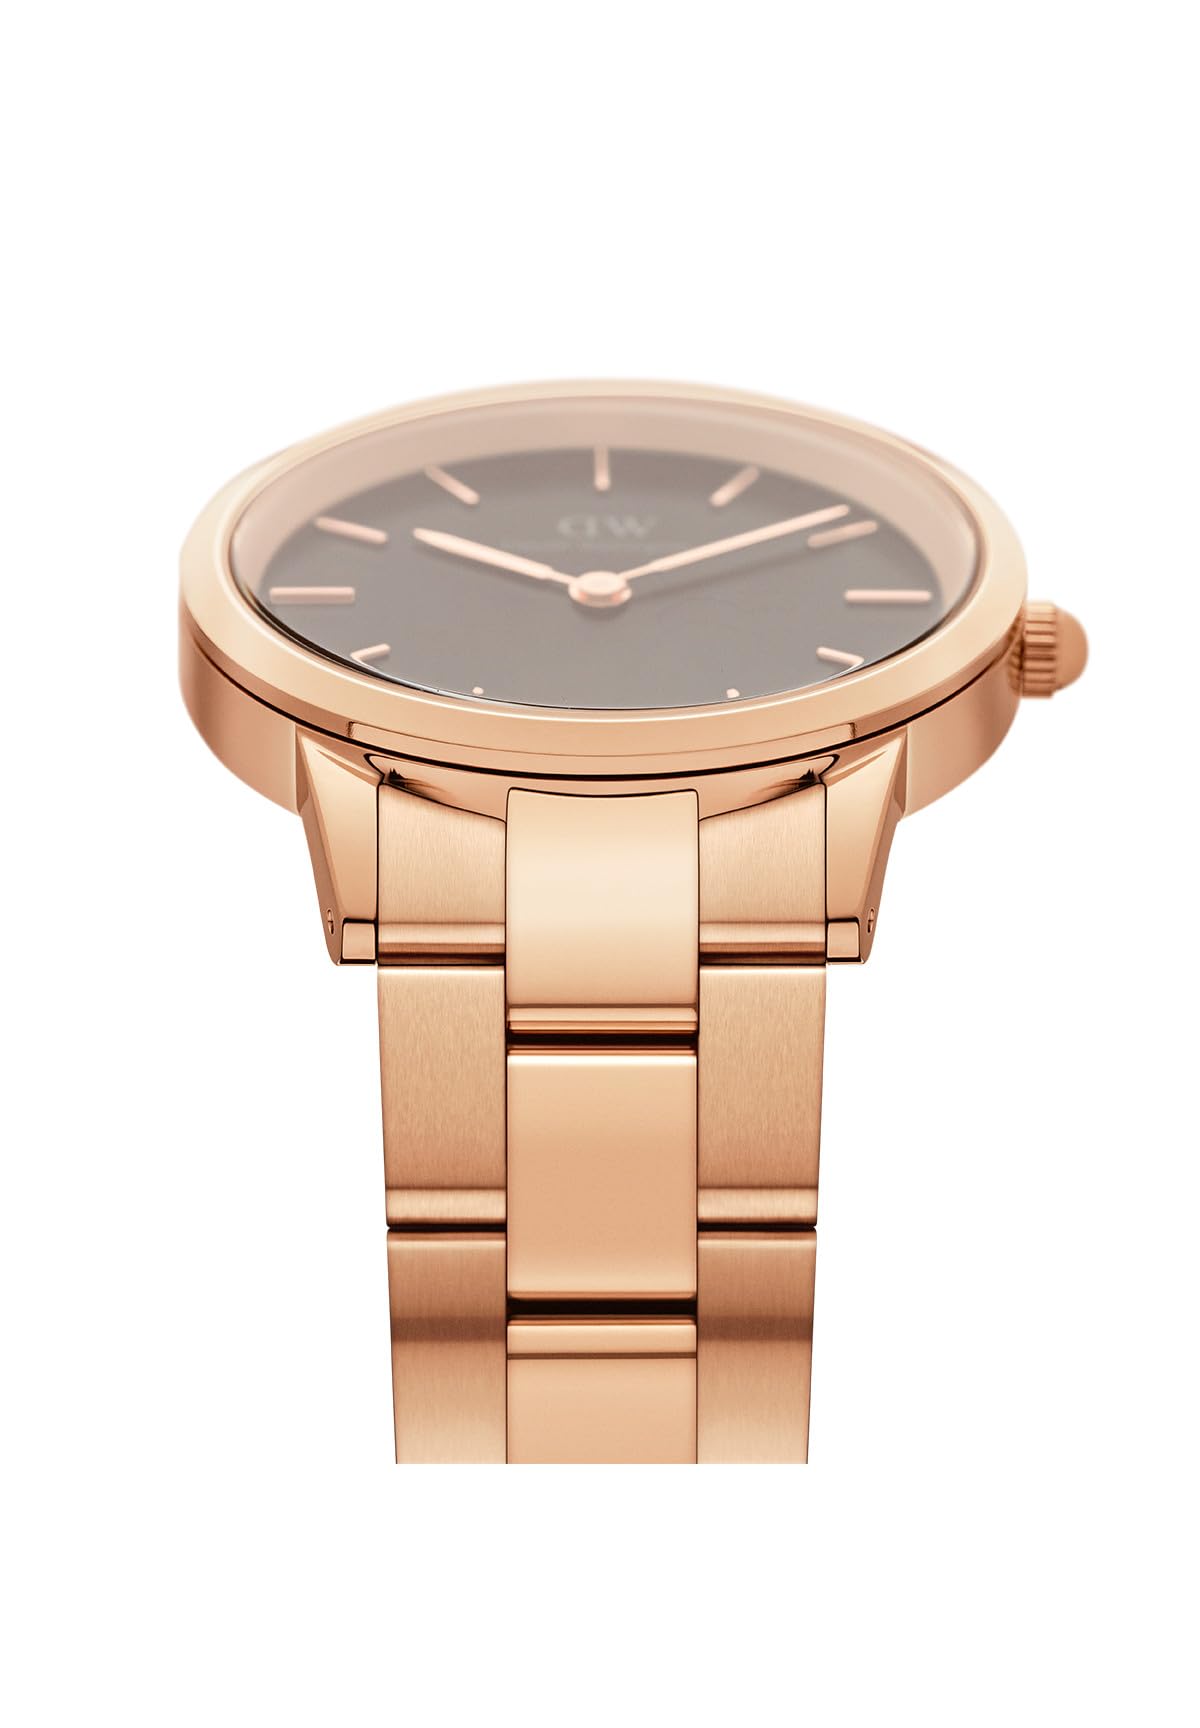 Daniel Wellington Iconic Watch Rose Gold Stainless Steel (316L)